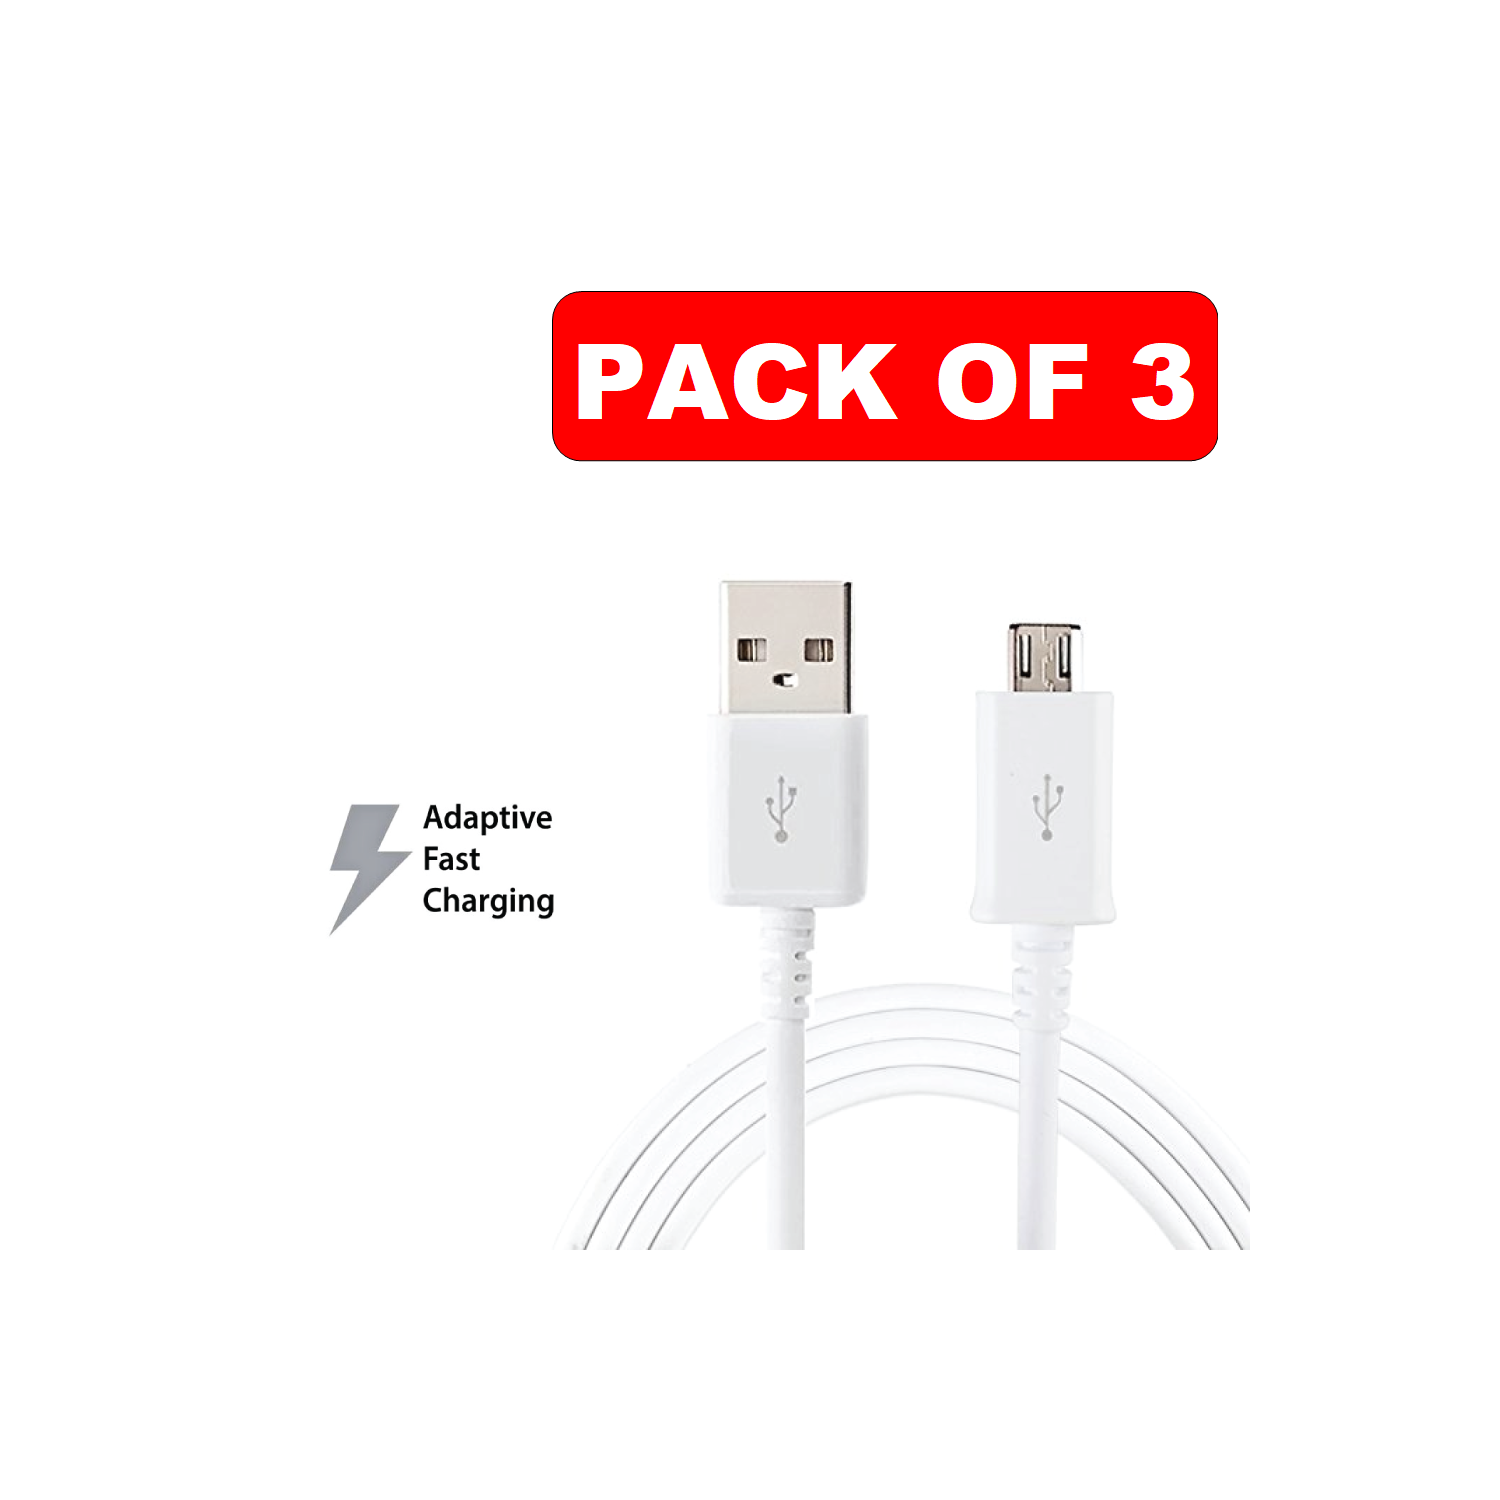 3x Micro USB Charging Cable 3ft For Samsung LG Android All Micro USB interface device(White)